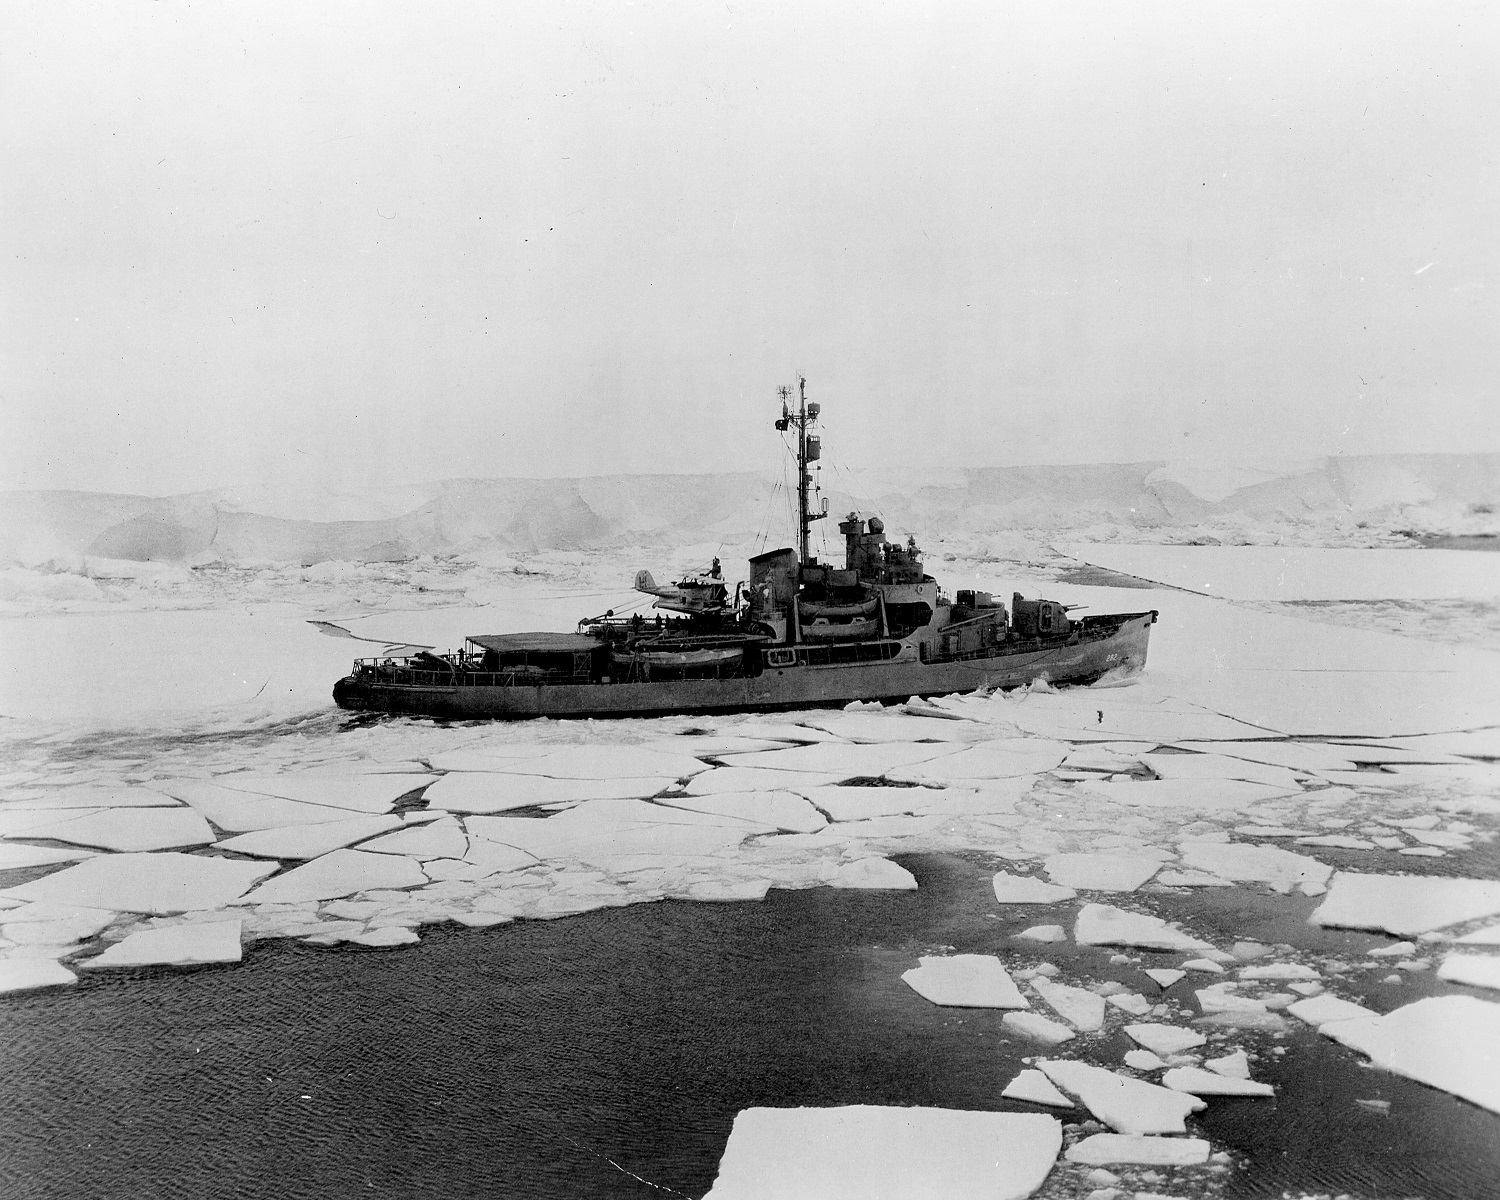 Famed Coast Guard Icebreaker Northwind, under the command of Capt. Tommy Thomas, breaking ice in 1947’s Operation “Deep Freeze.” (U.S. Coast Guard)